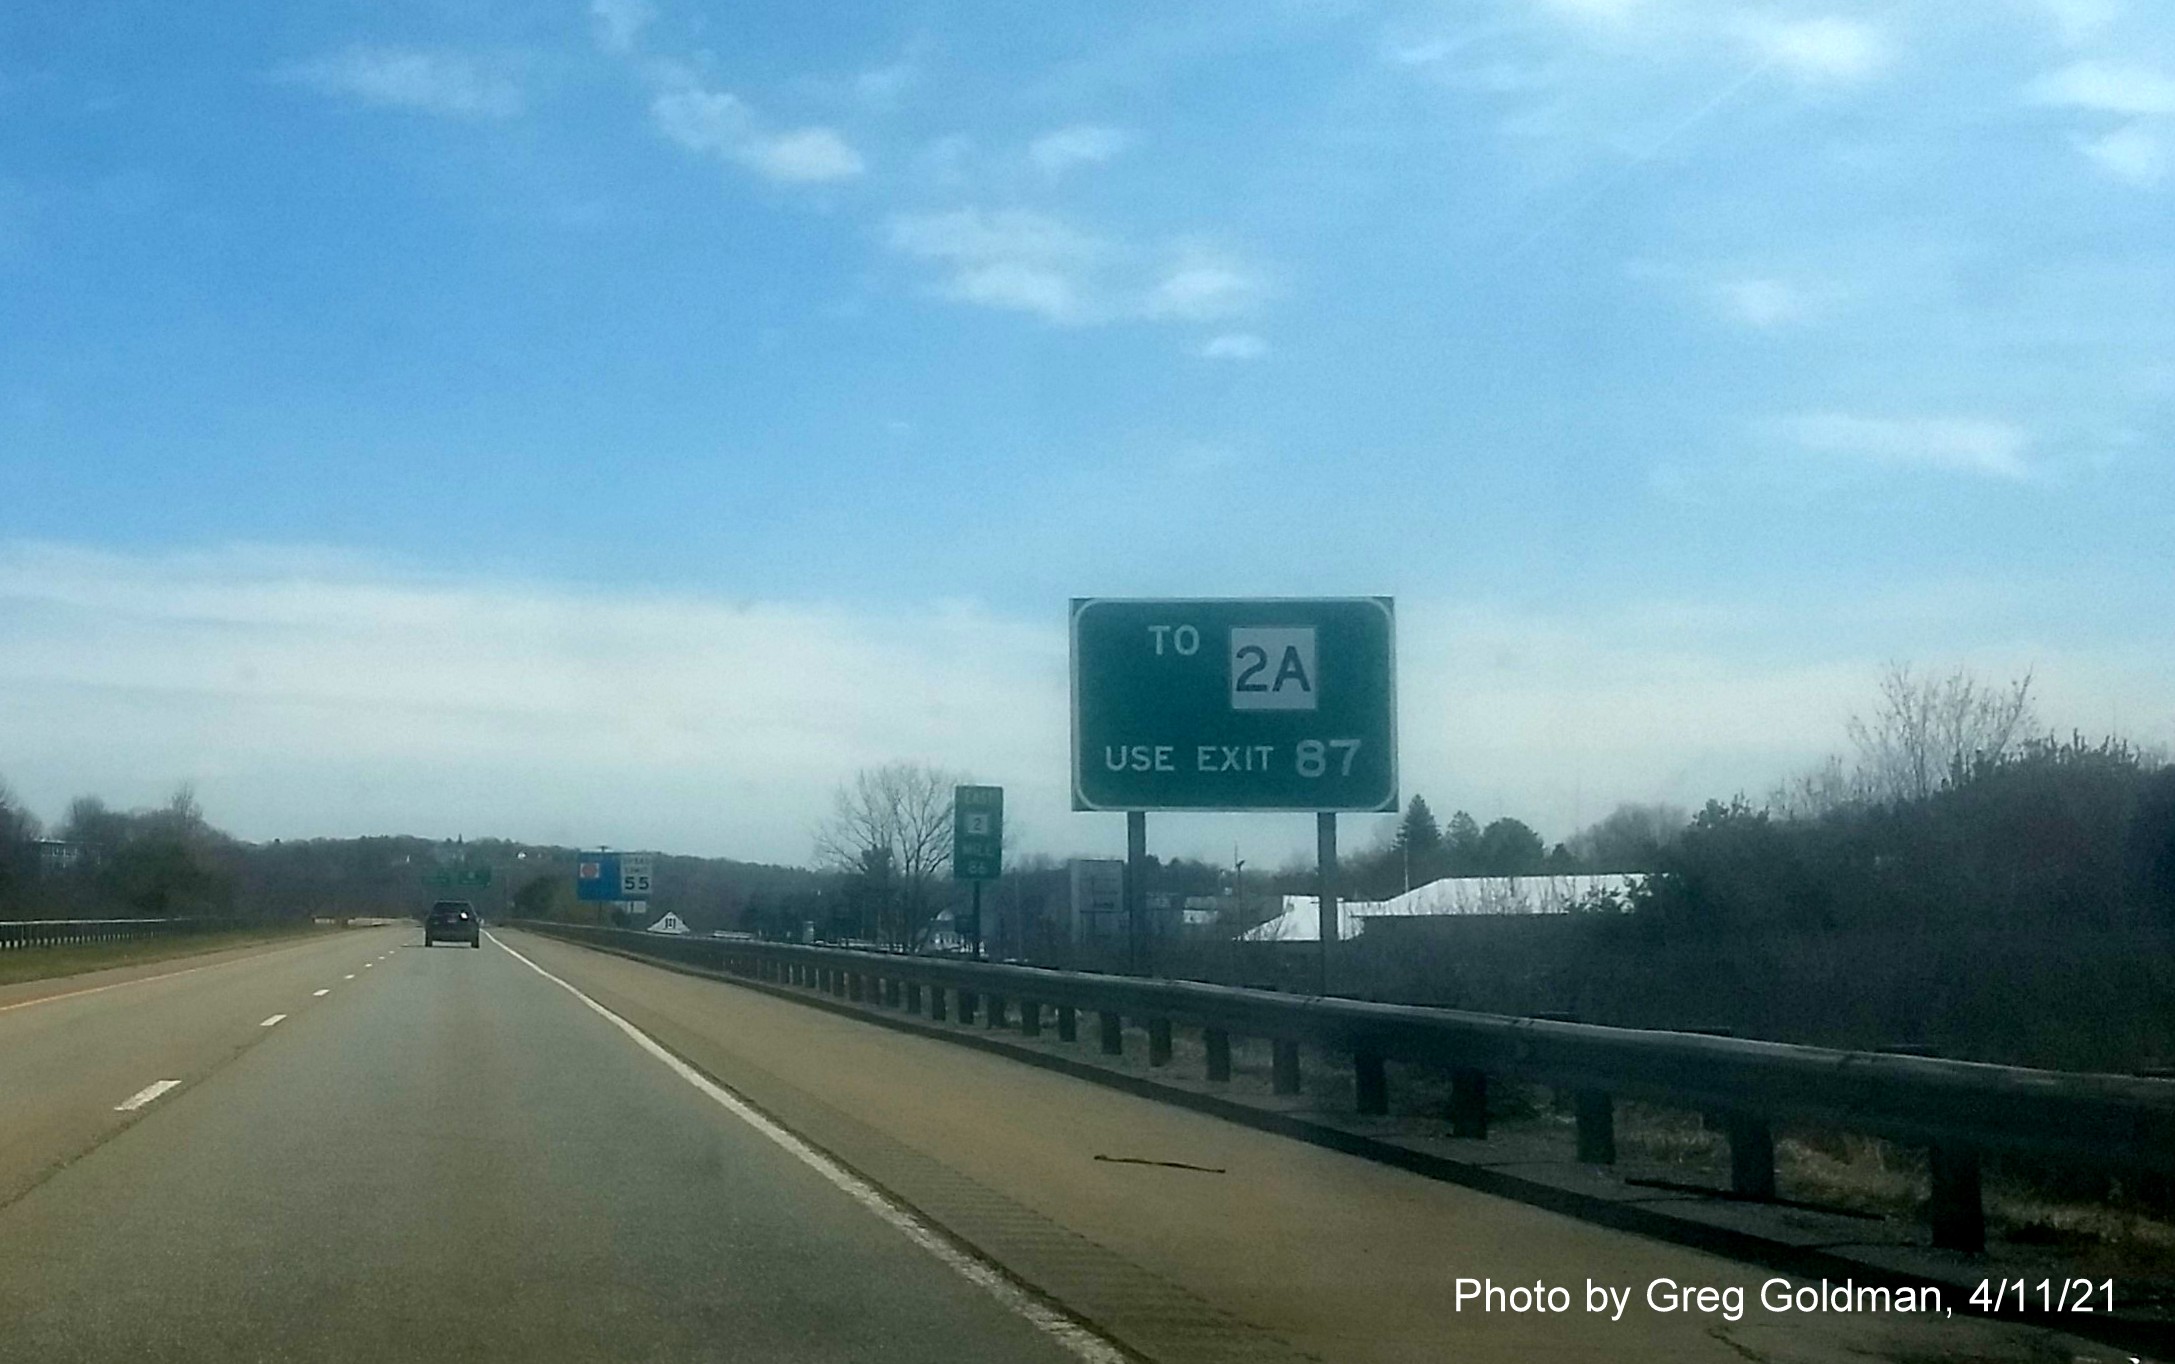 Image of auxiliary sign for Pearson Blvd with new milepost based exit number on MA 2 East in Gardner, by Greg Goldman, April 2021